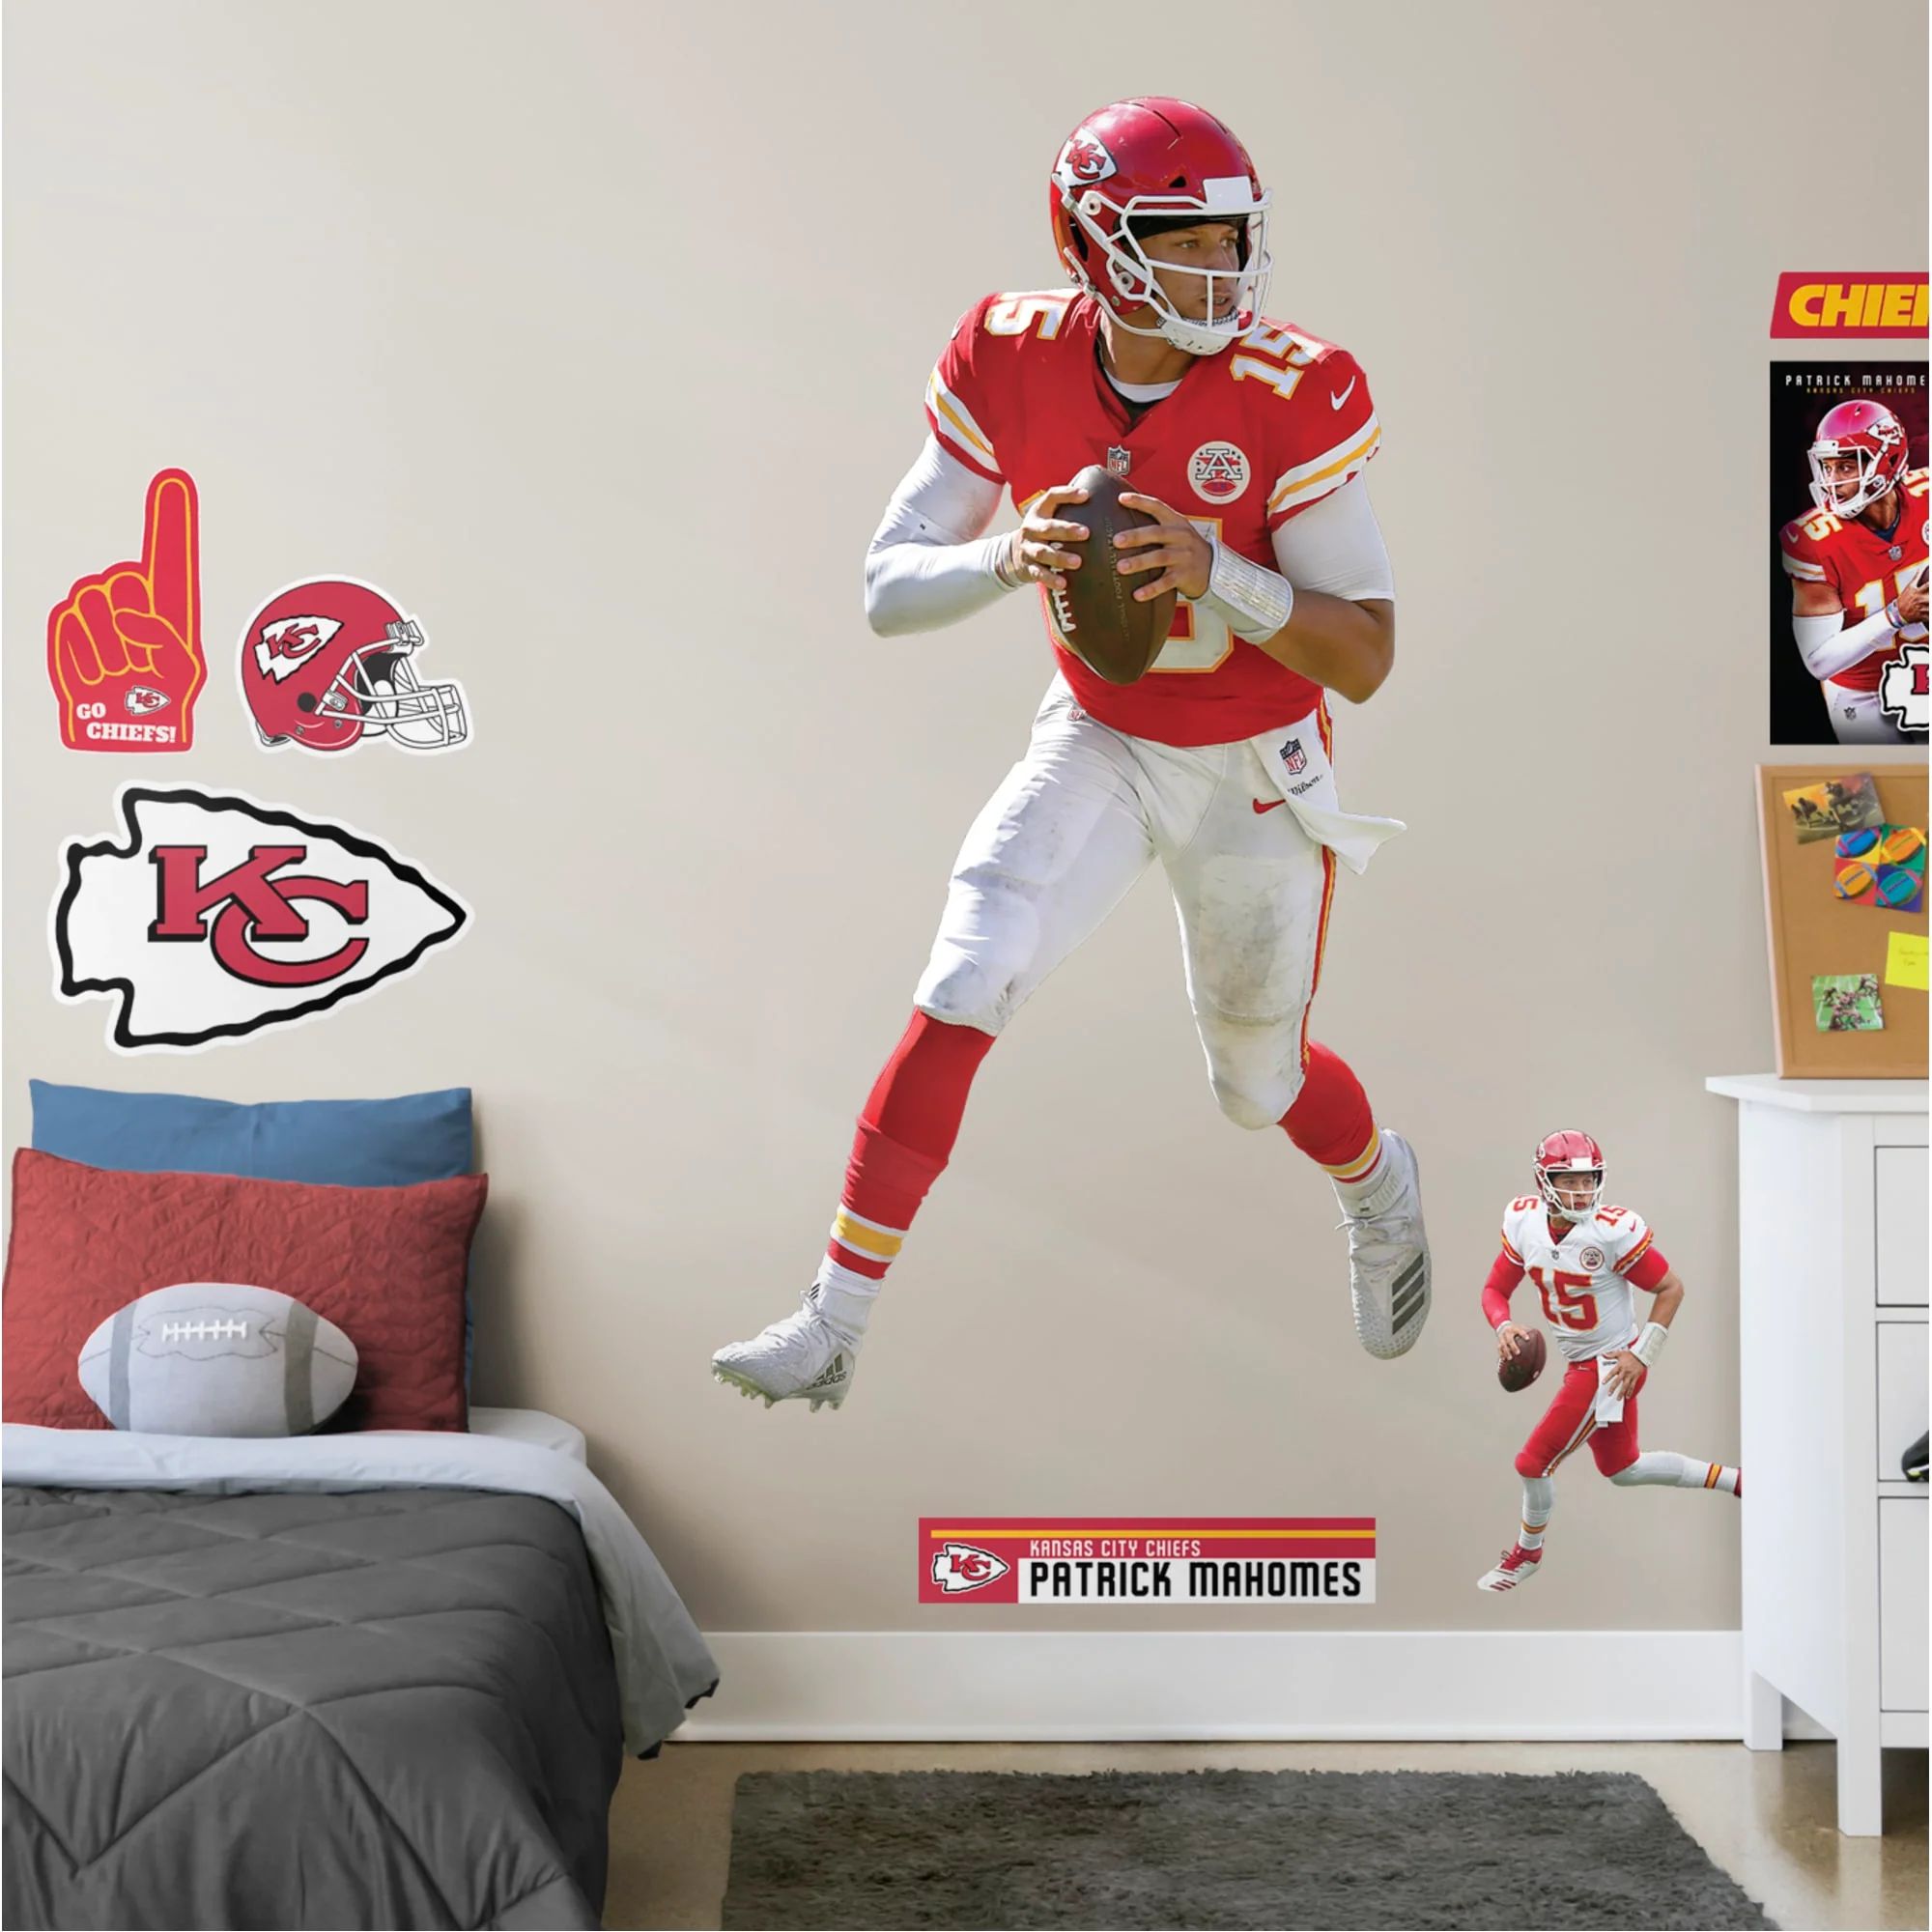 Patrick Mahomes NFL Removable Wall Decal | Fathead Official Site | Fathead